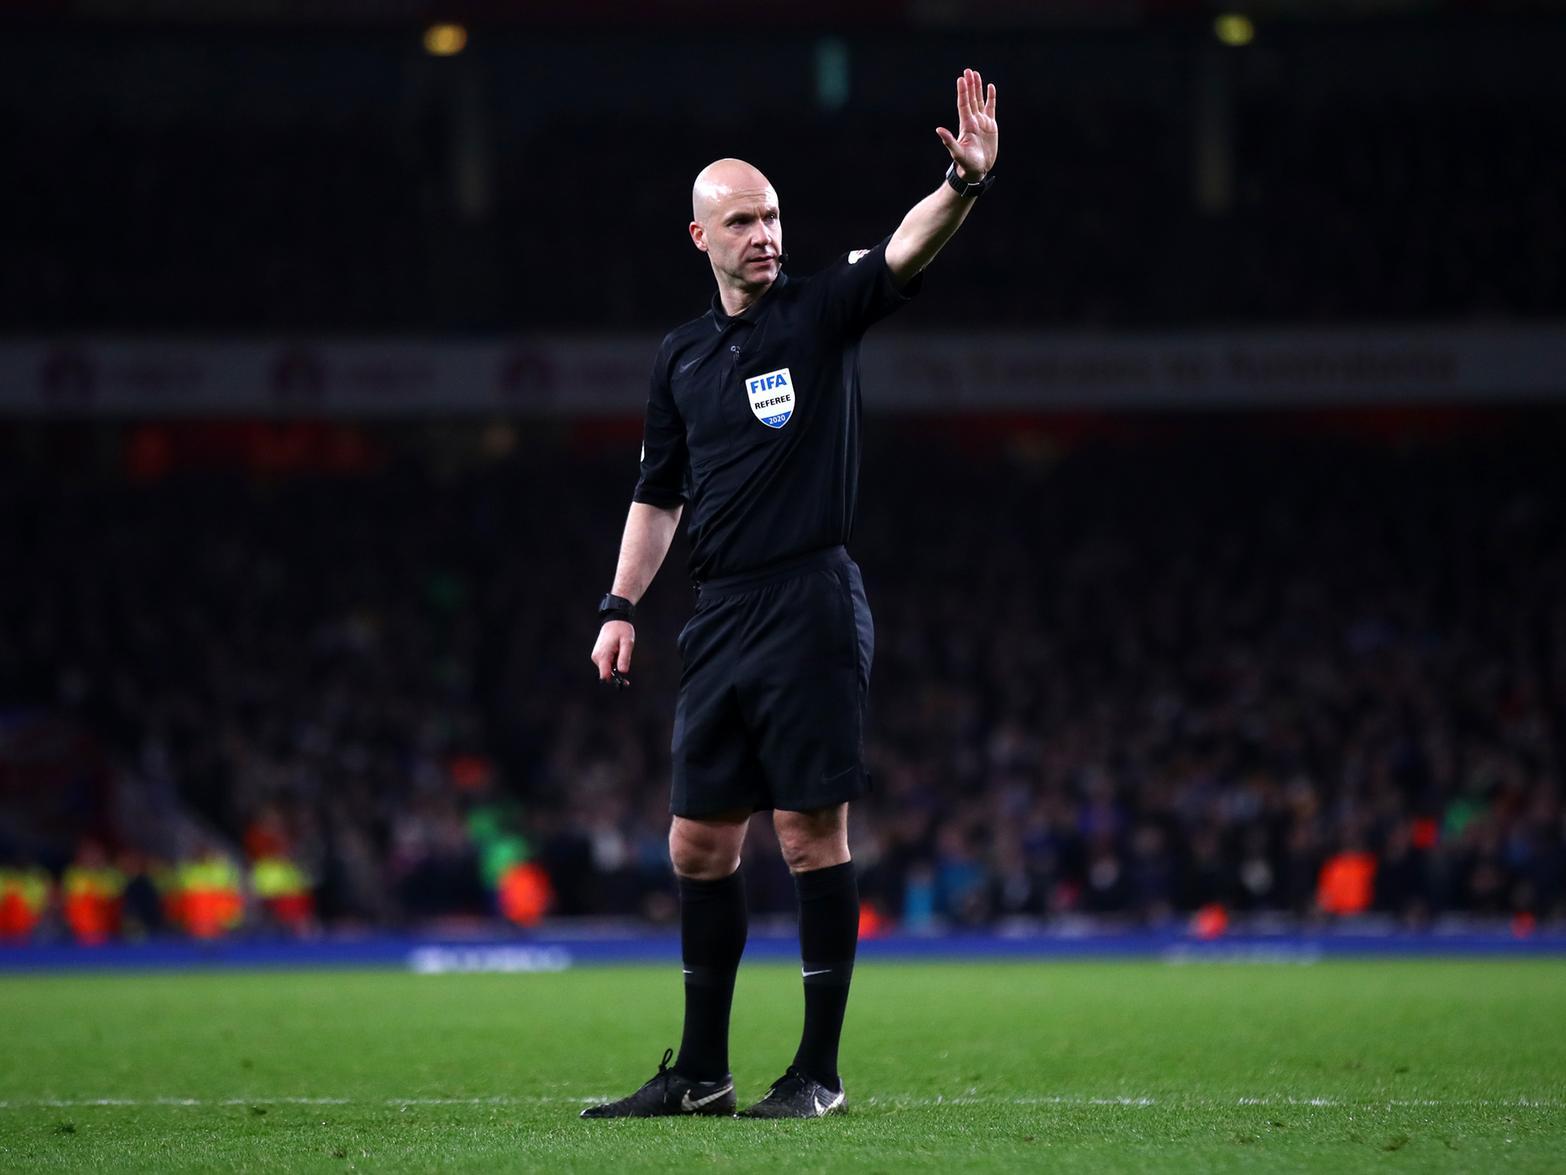 Anthony Taylor, 5 - Missed a kick out by Lacazette right in front of him. Should have got a better grip on Xhaka. Yellow cards felt inconsistent.